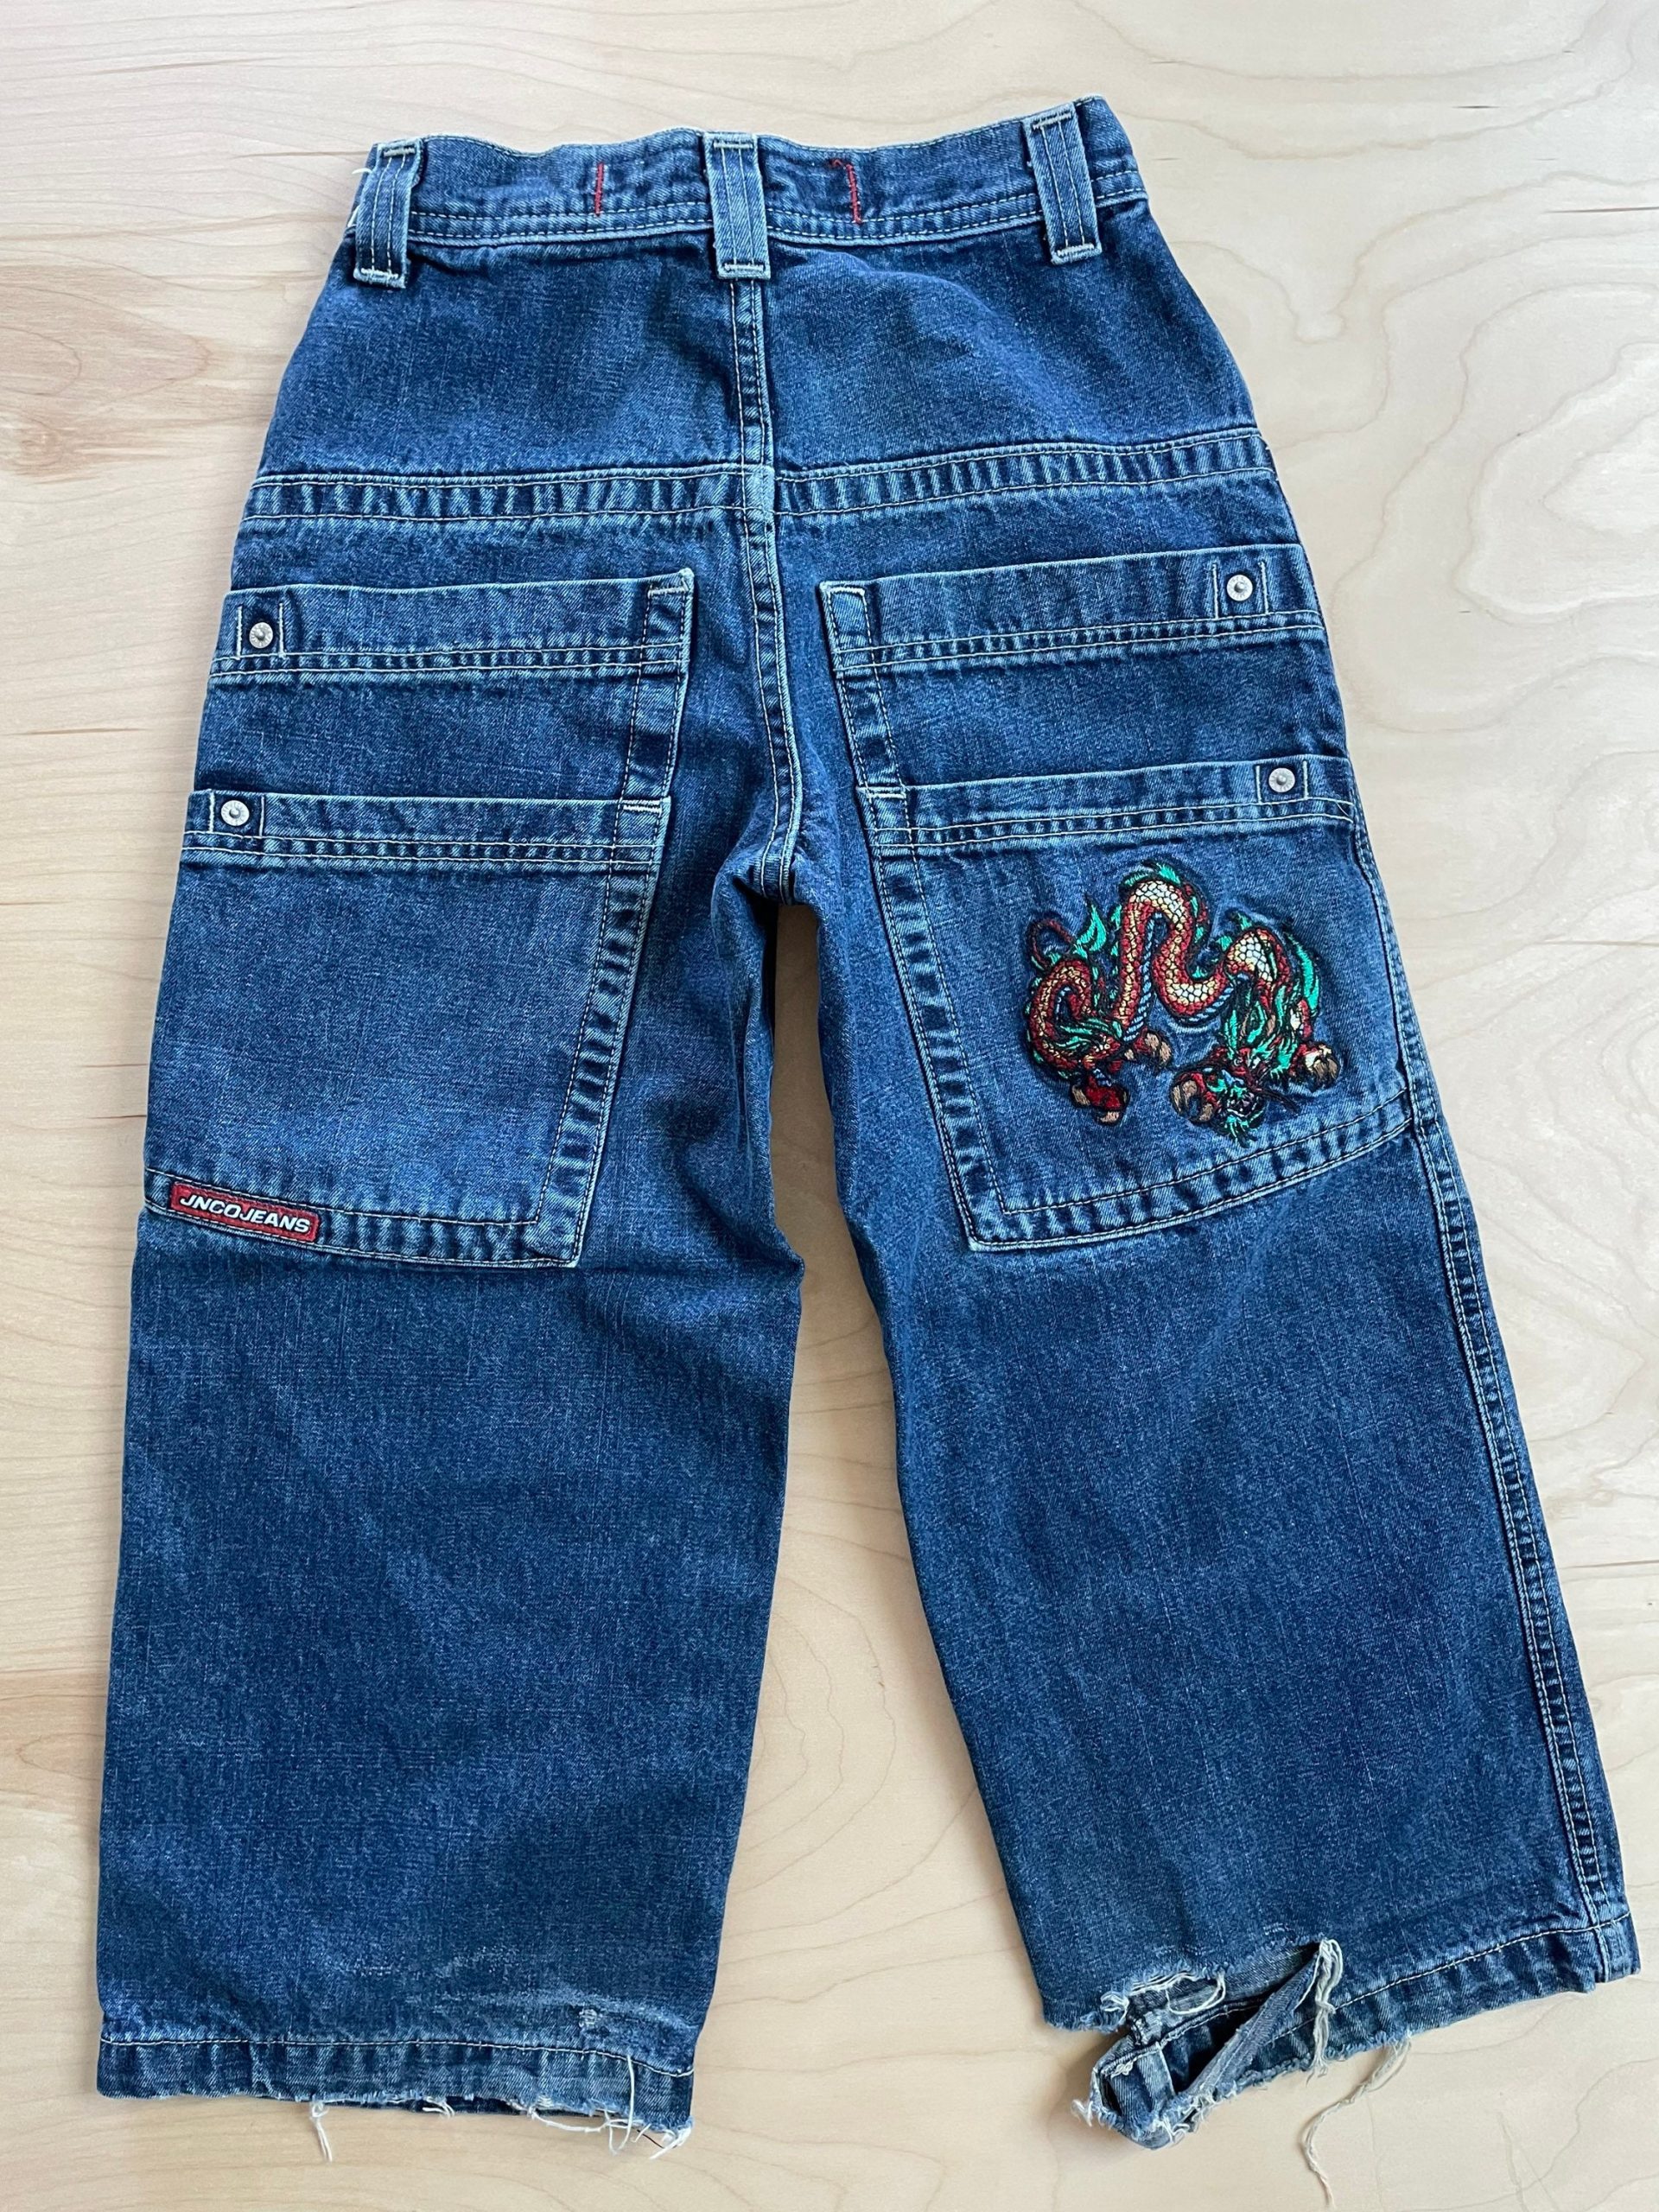 Jnco pants: The Resurgence of it in Contemporary Fashion插图4